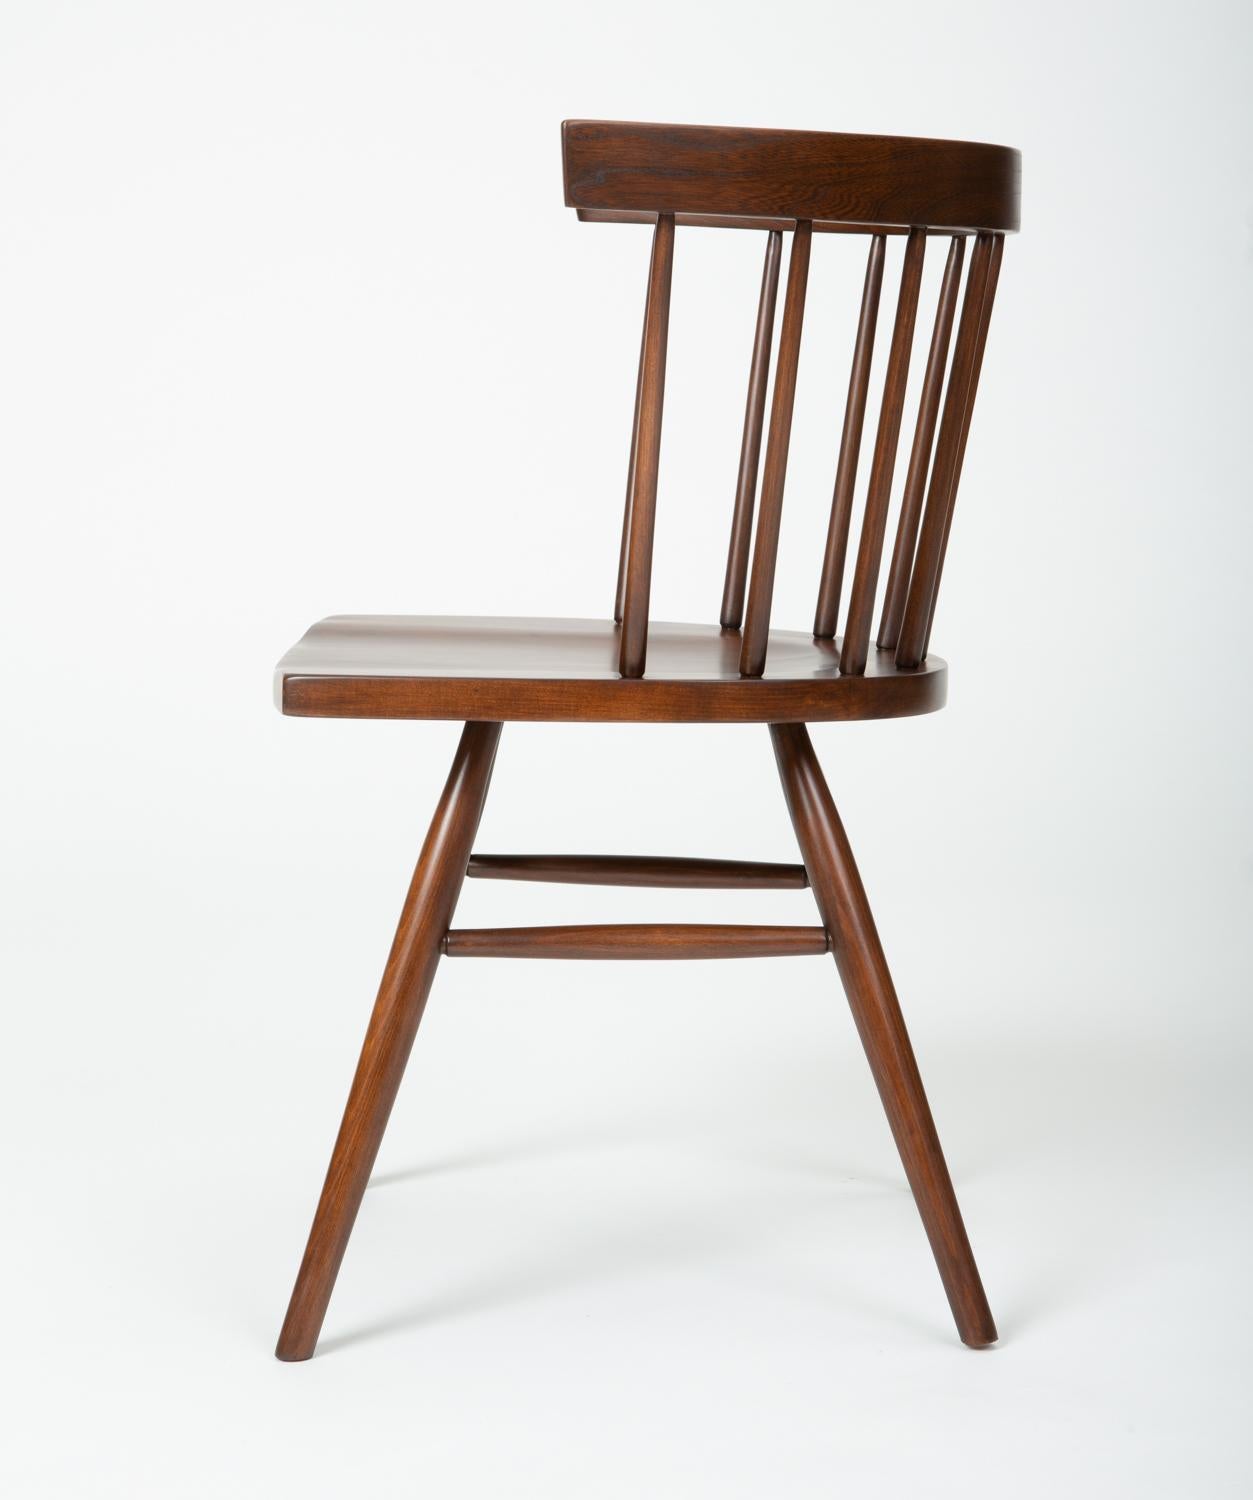 American N19 Chair by George Nakashima for Knoll